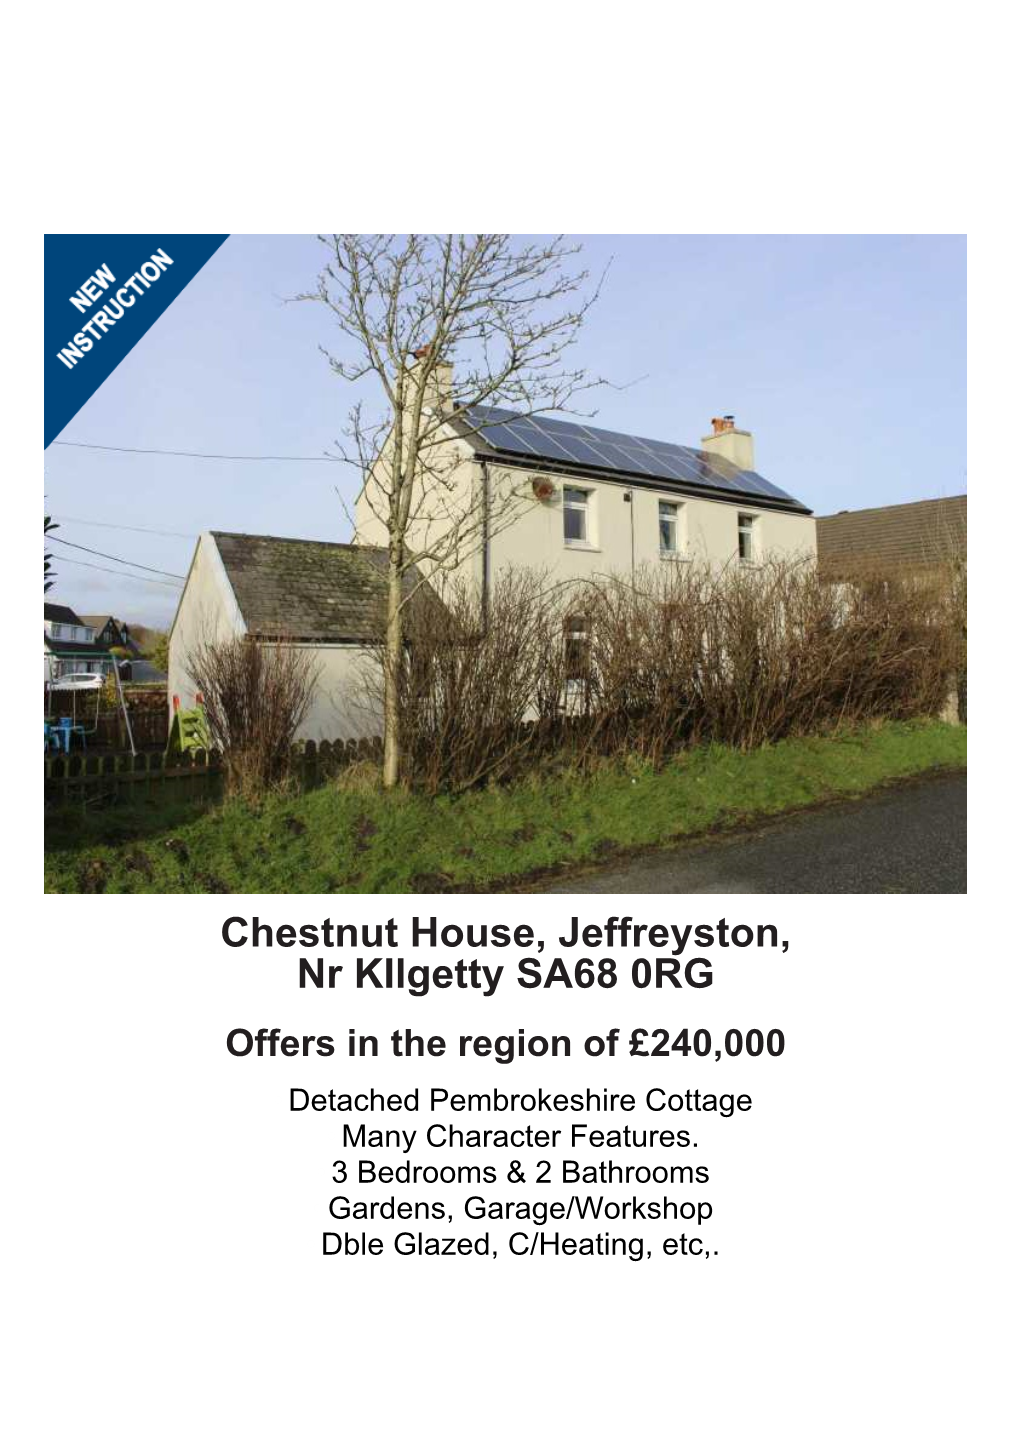 Chestnut House, Jeffreyston, Nr Kilgetty SA68 0RG Offers in the Region of £240,000 • Detached Pembrokeshire Cottage • Many Character Features